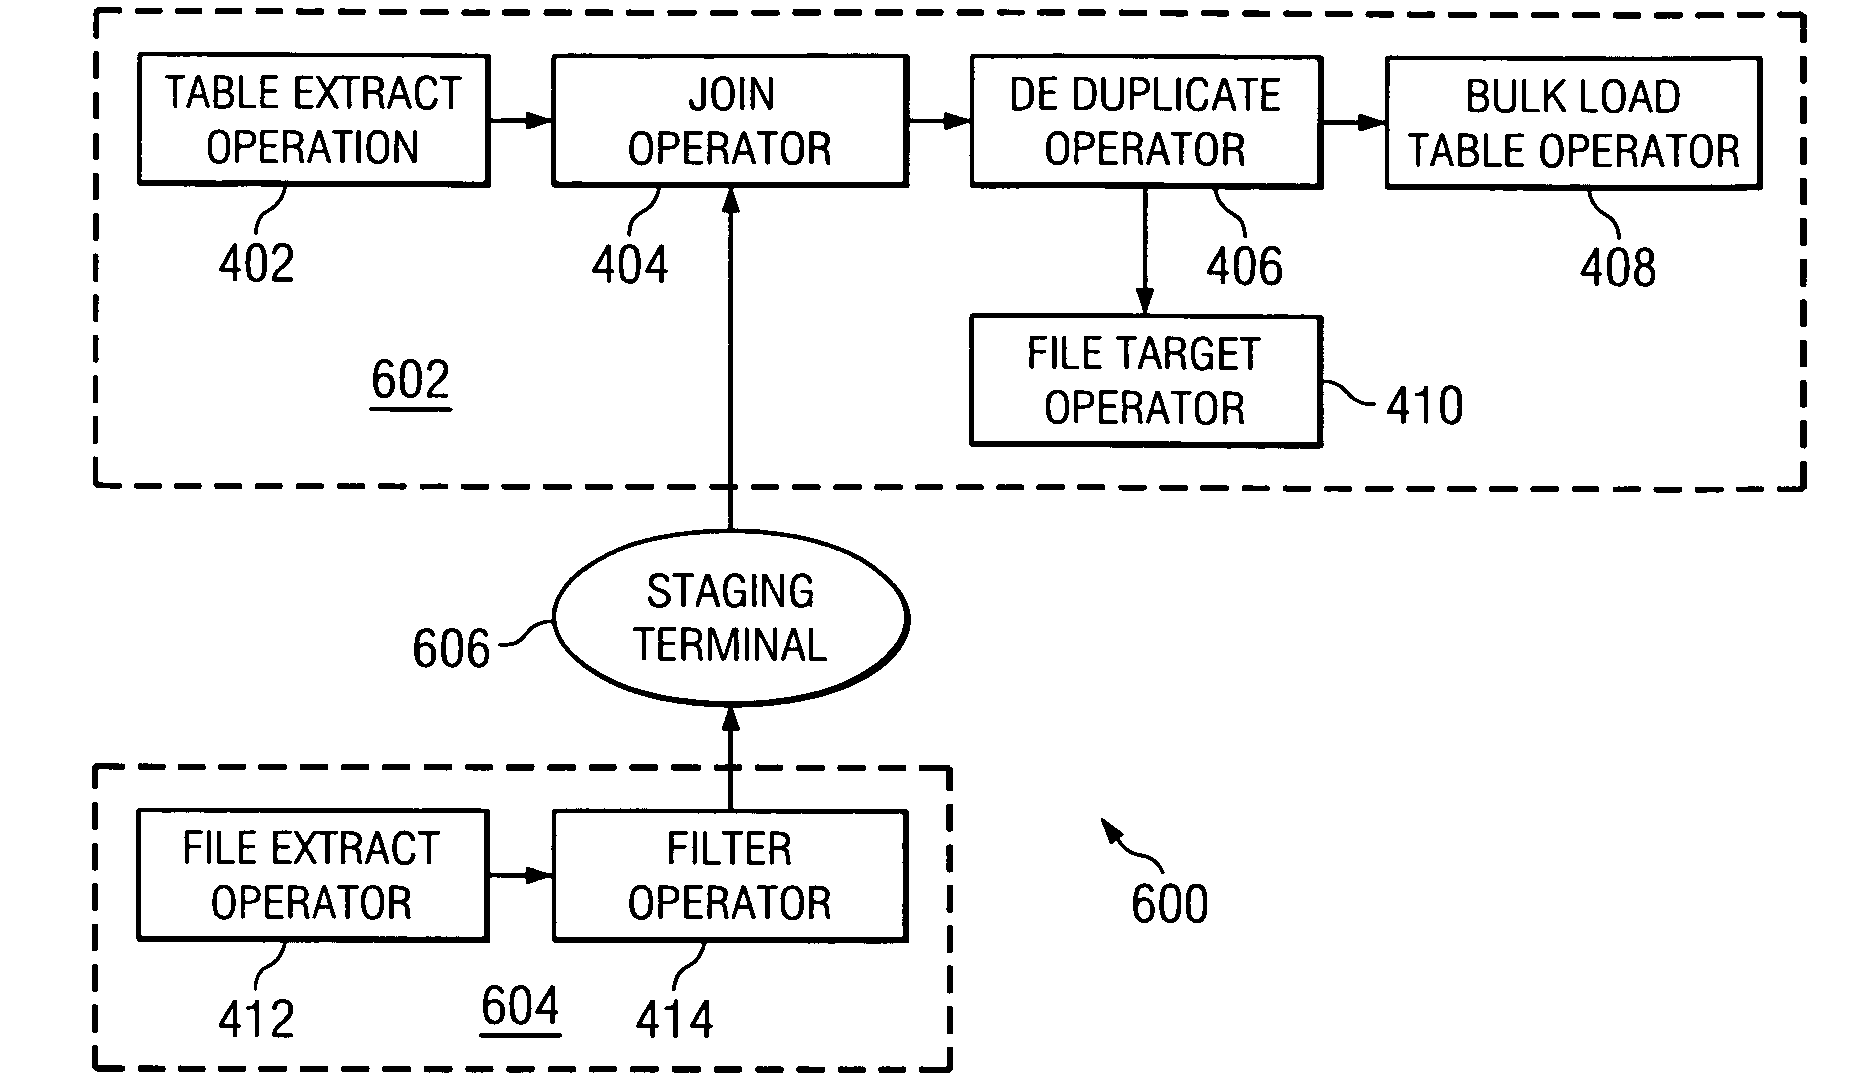 System and method for generating code for an integrated data system